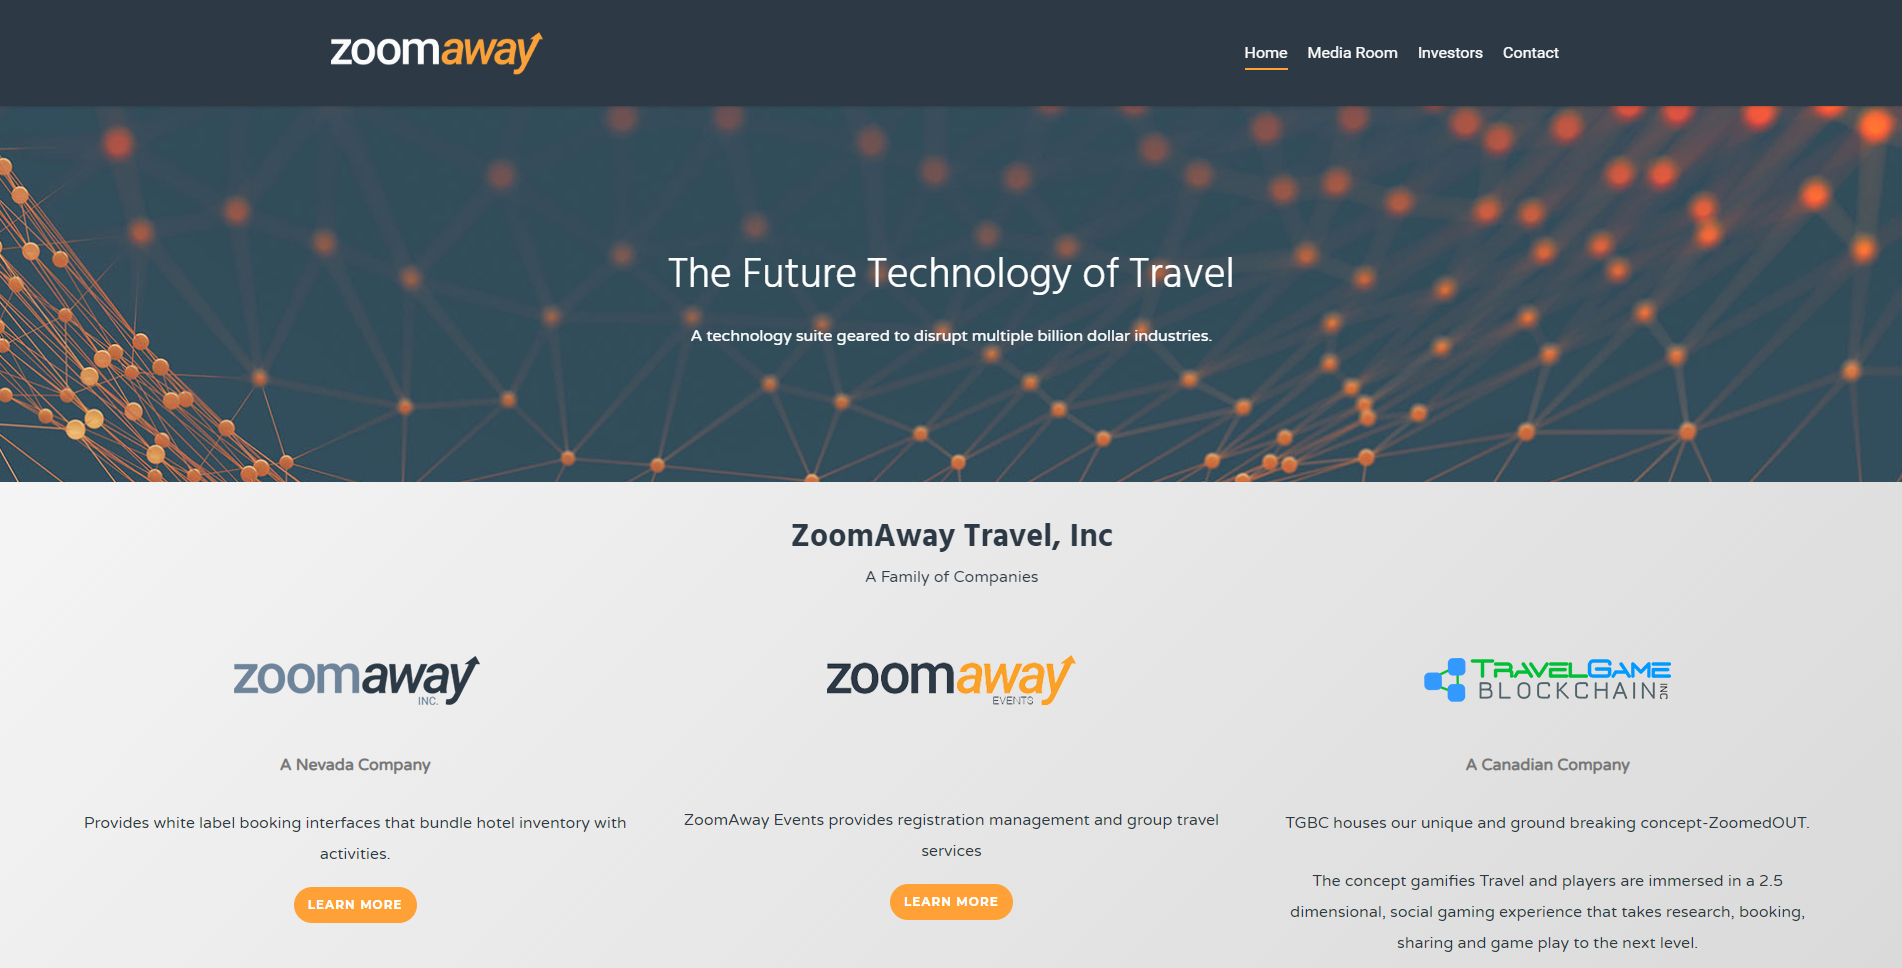 ZoomAway Announces Launch Of New Corporate Website